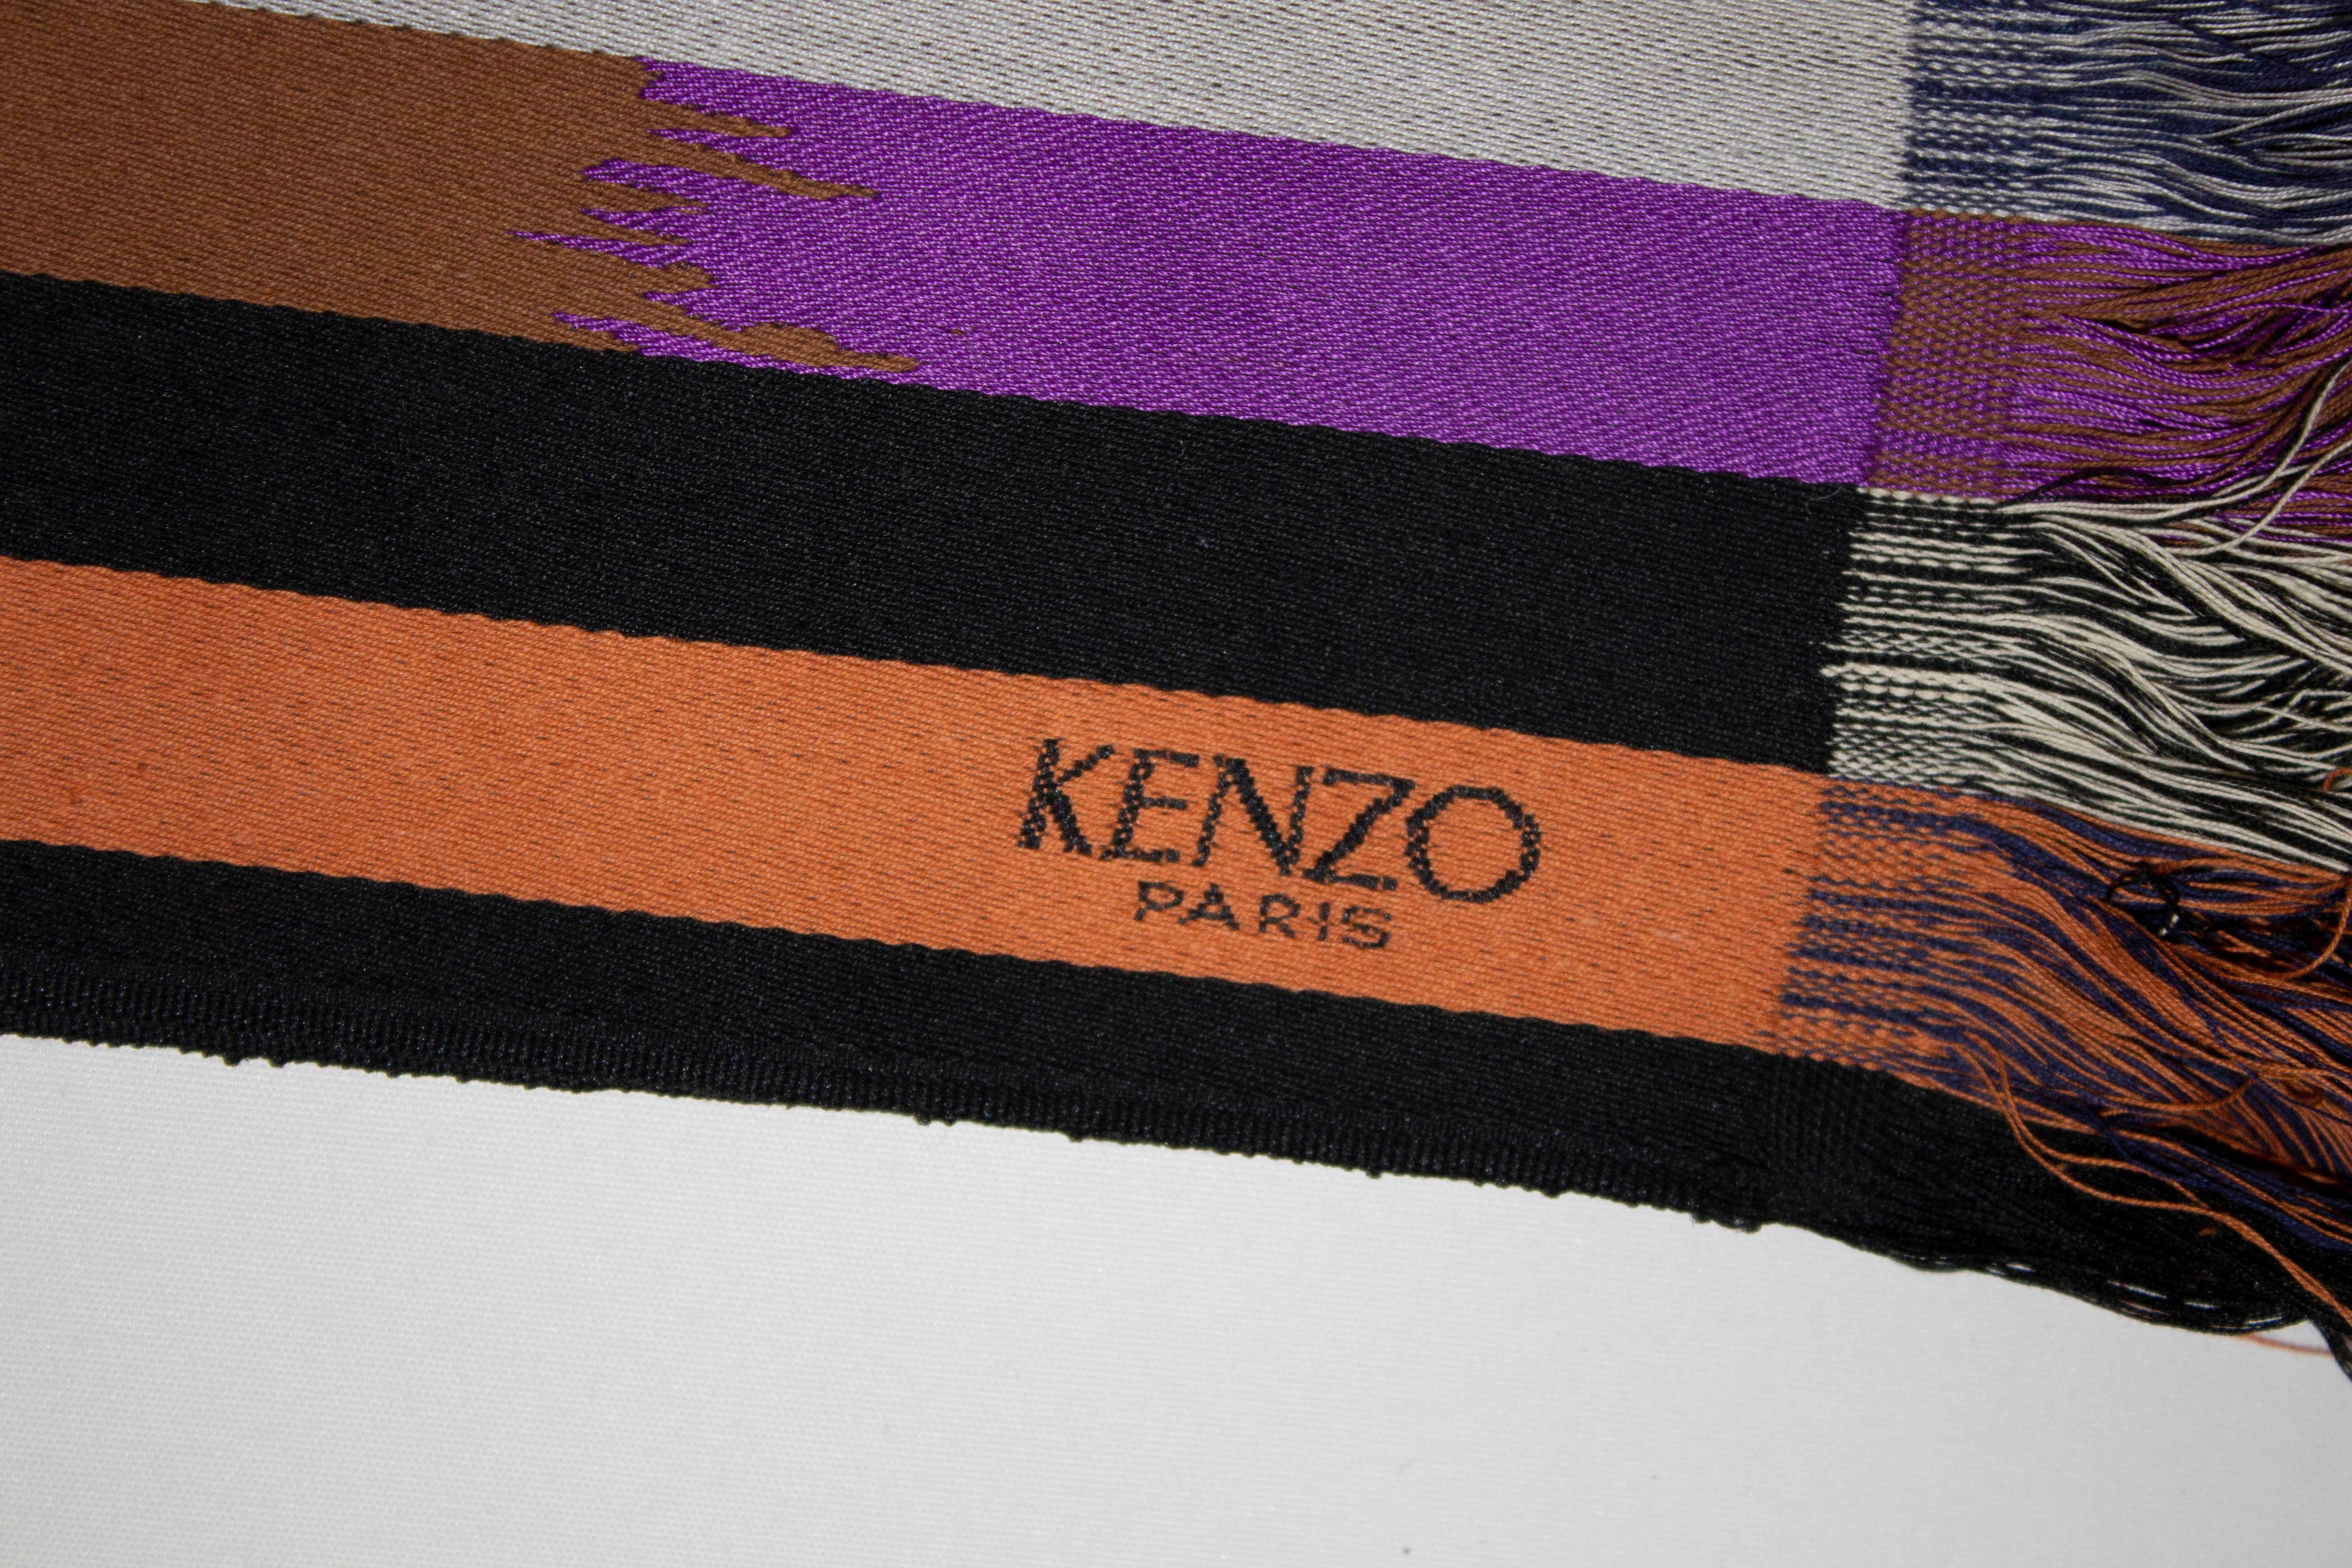 A stylish vintage belt by Kenzo Paris. The obi style belt is in shades of brown and orange with fringe detail. Measurements: Height 4 1/2'' length 76'' without fringing.